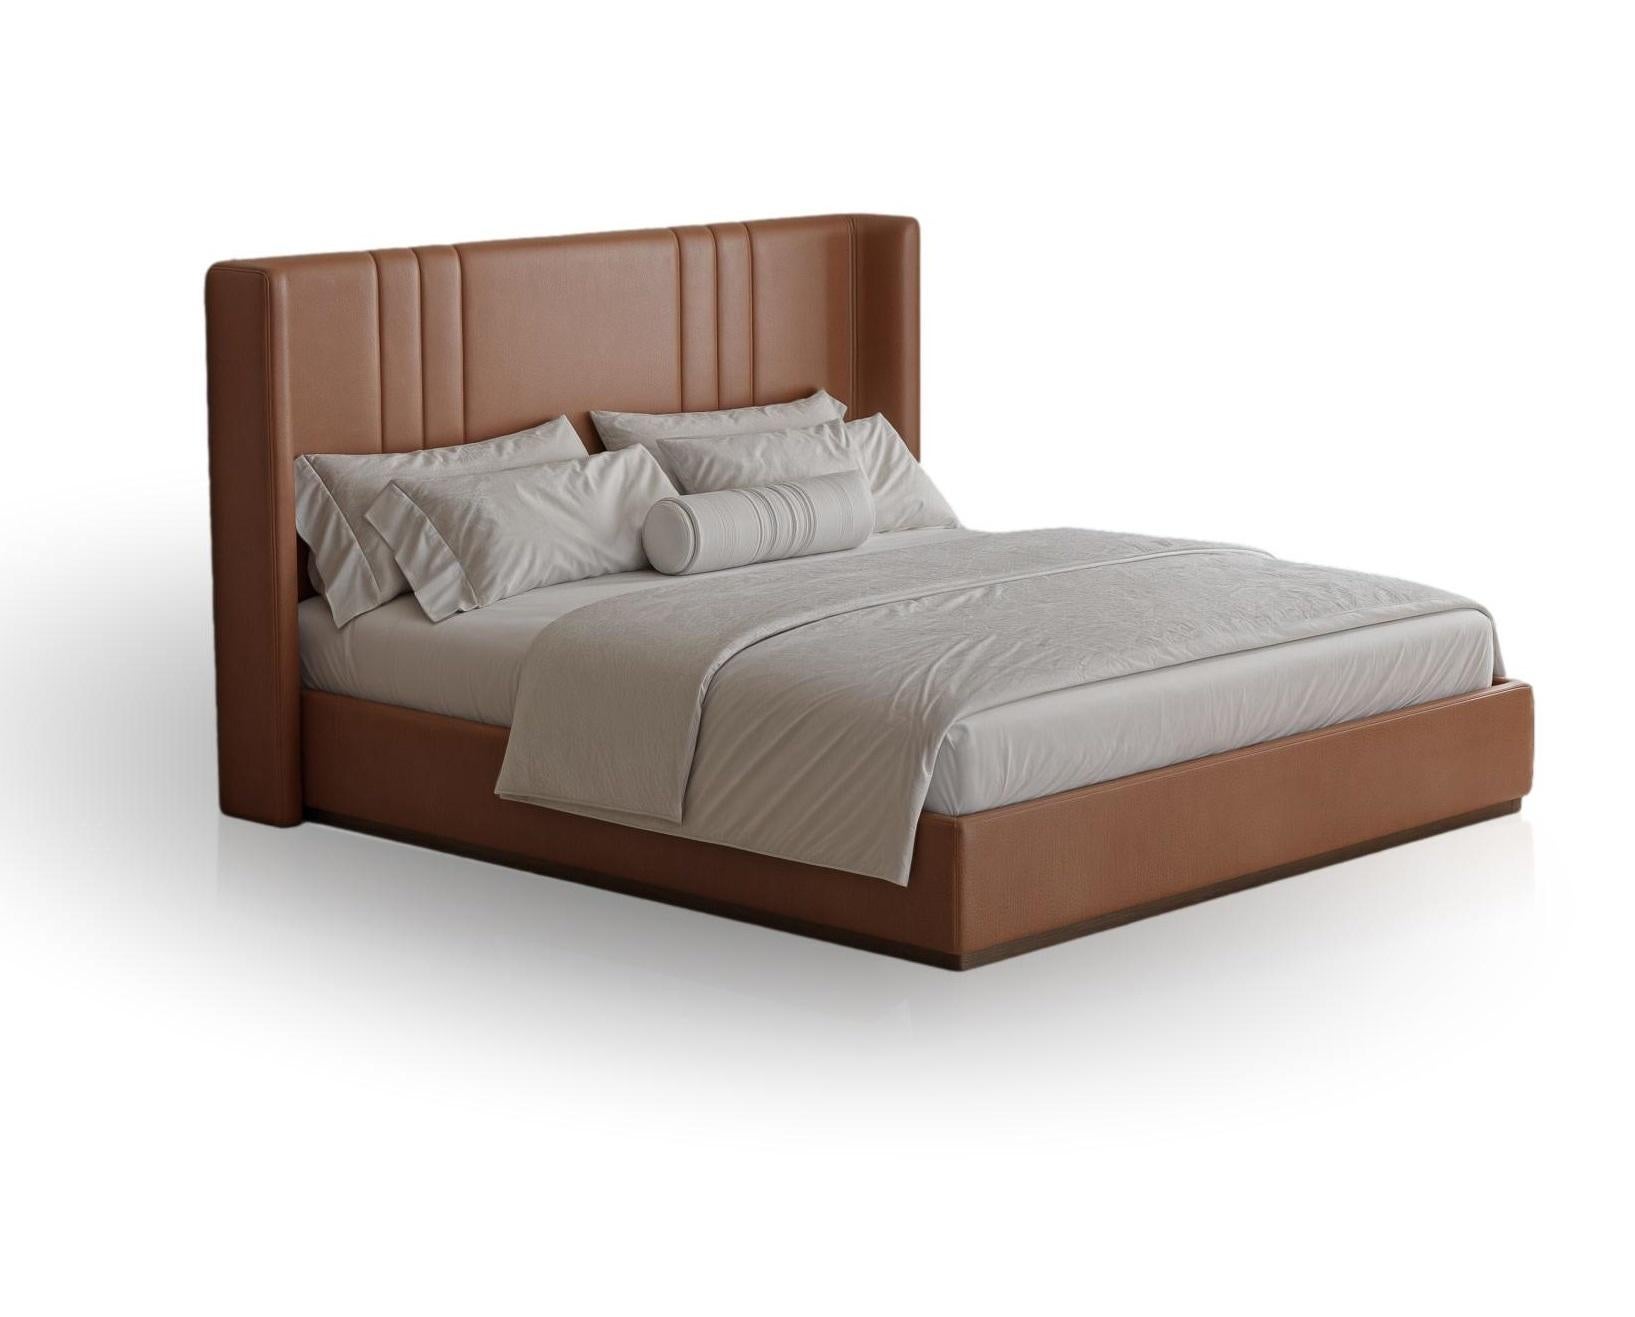 American Contemporary King-Size Leather Bed With Detailed Headboard Stitching For Sale